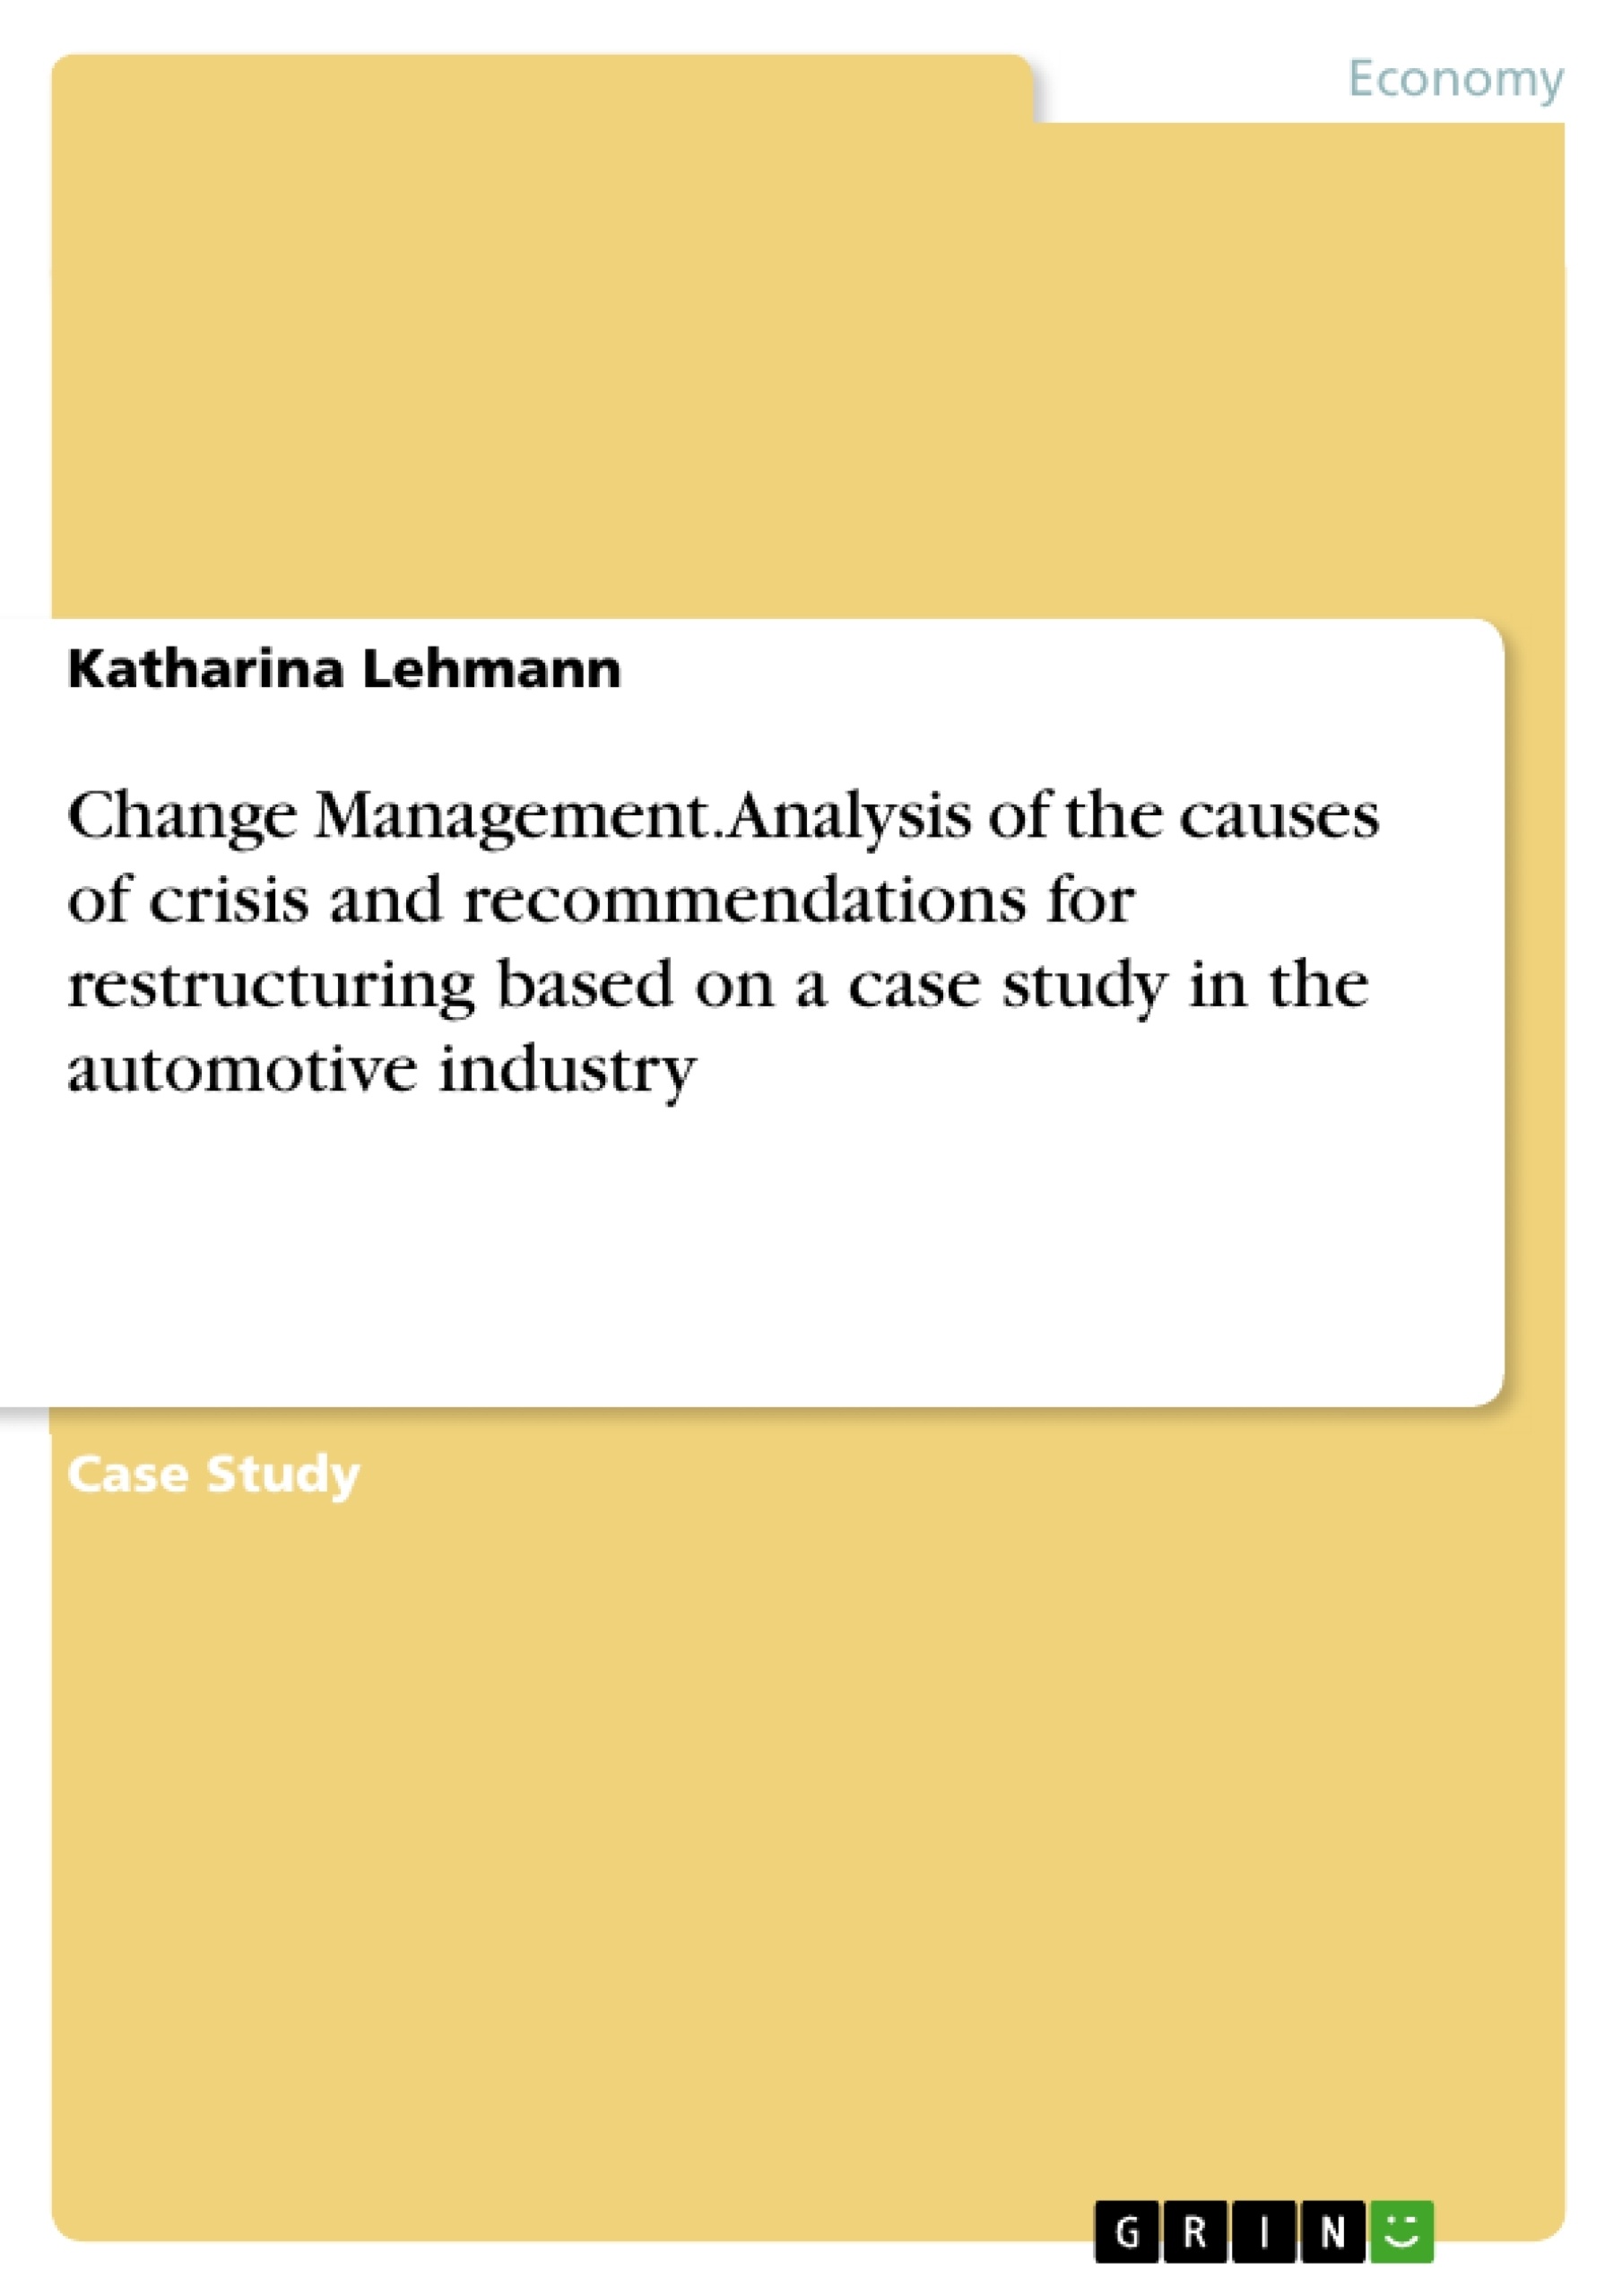 Title: Change Management. Analysis of the causes of crisis and recommendations for restructuring based on a case study in the automotive industry